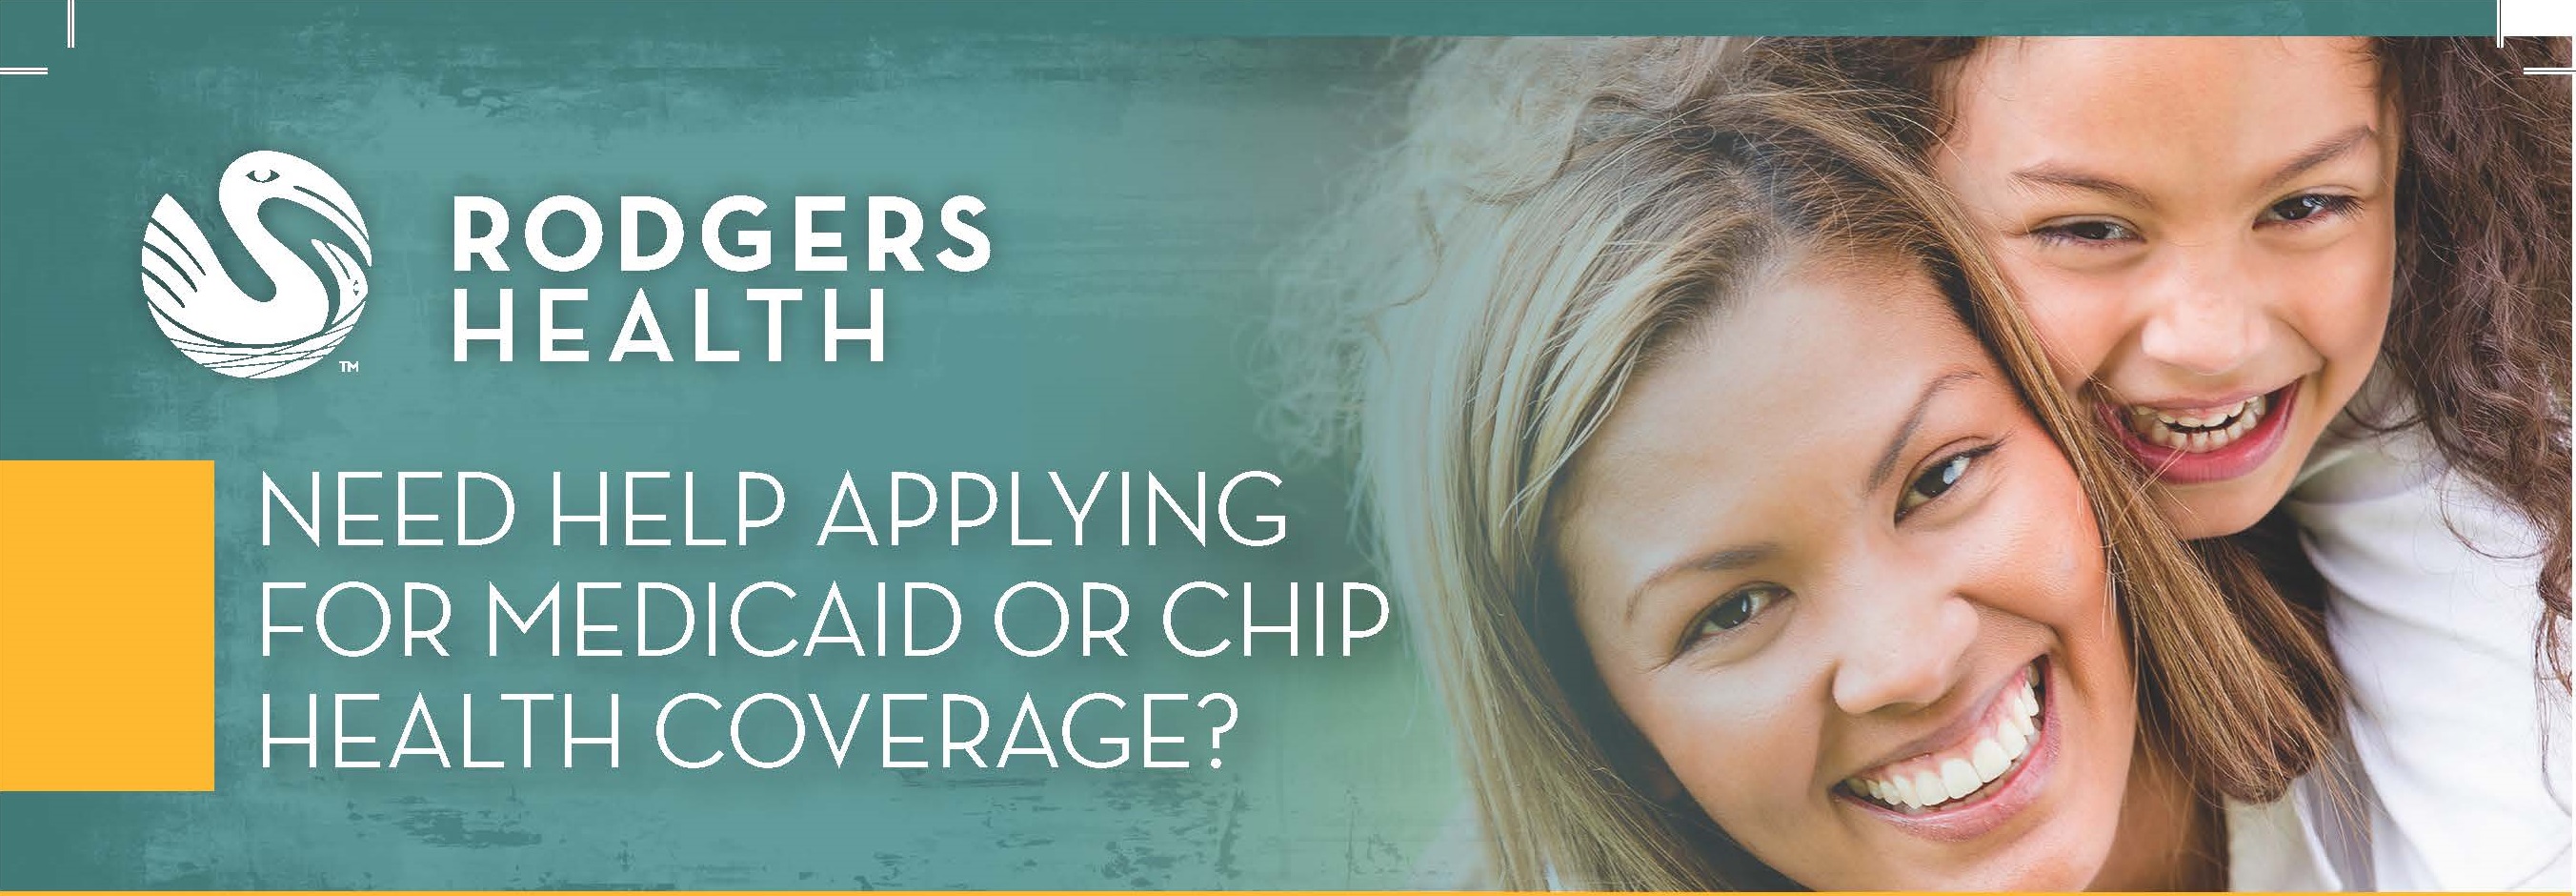 Need Help Applying for Medicaid or CHIP Health Coverage?